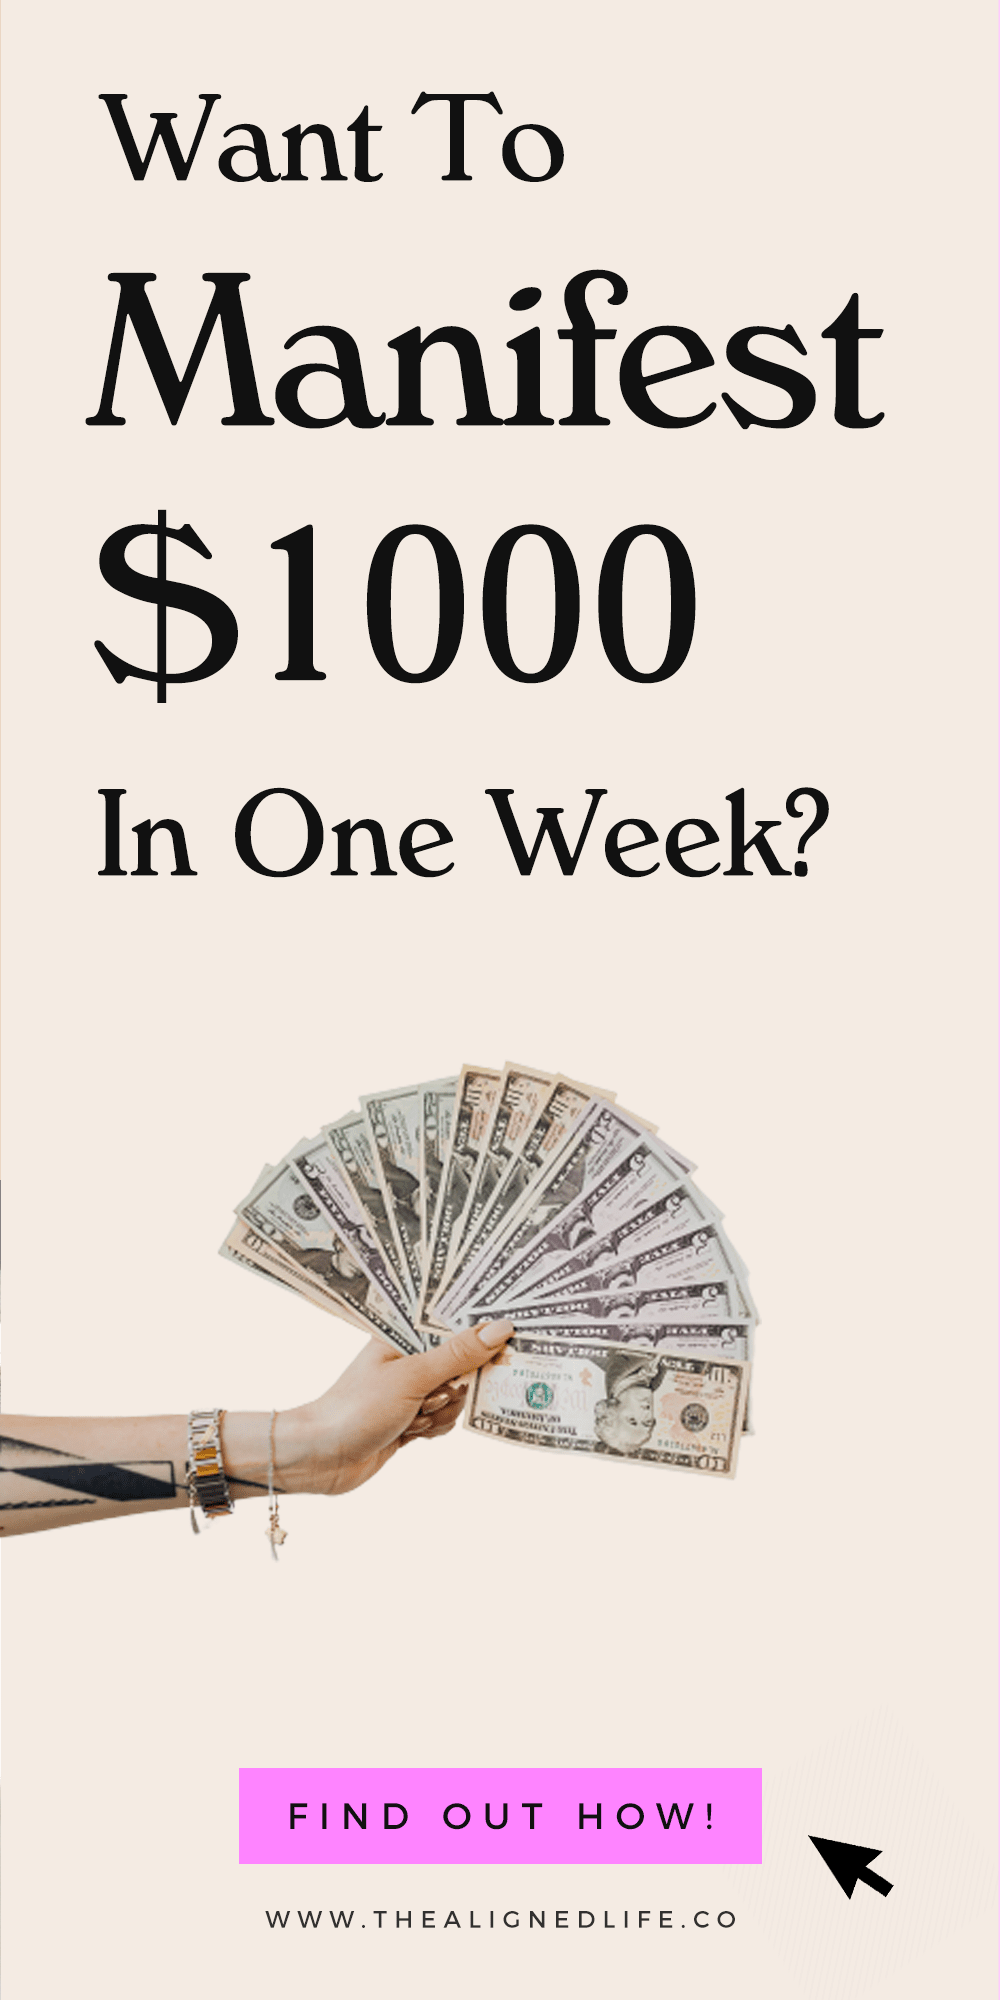 hand with money and text How To Manifest $1000 In One Week